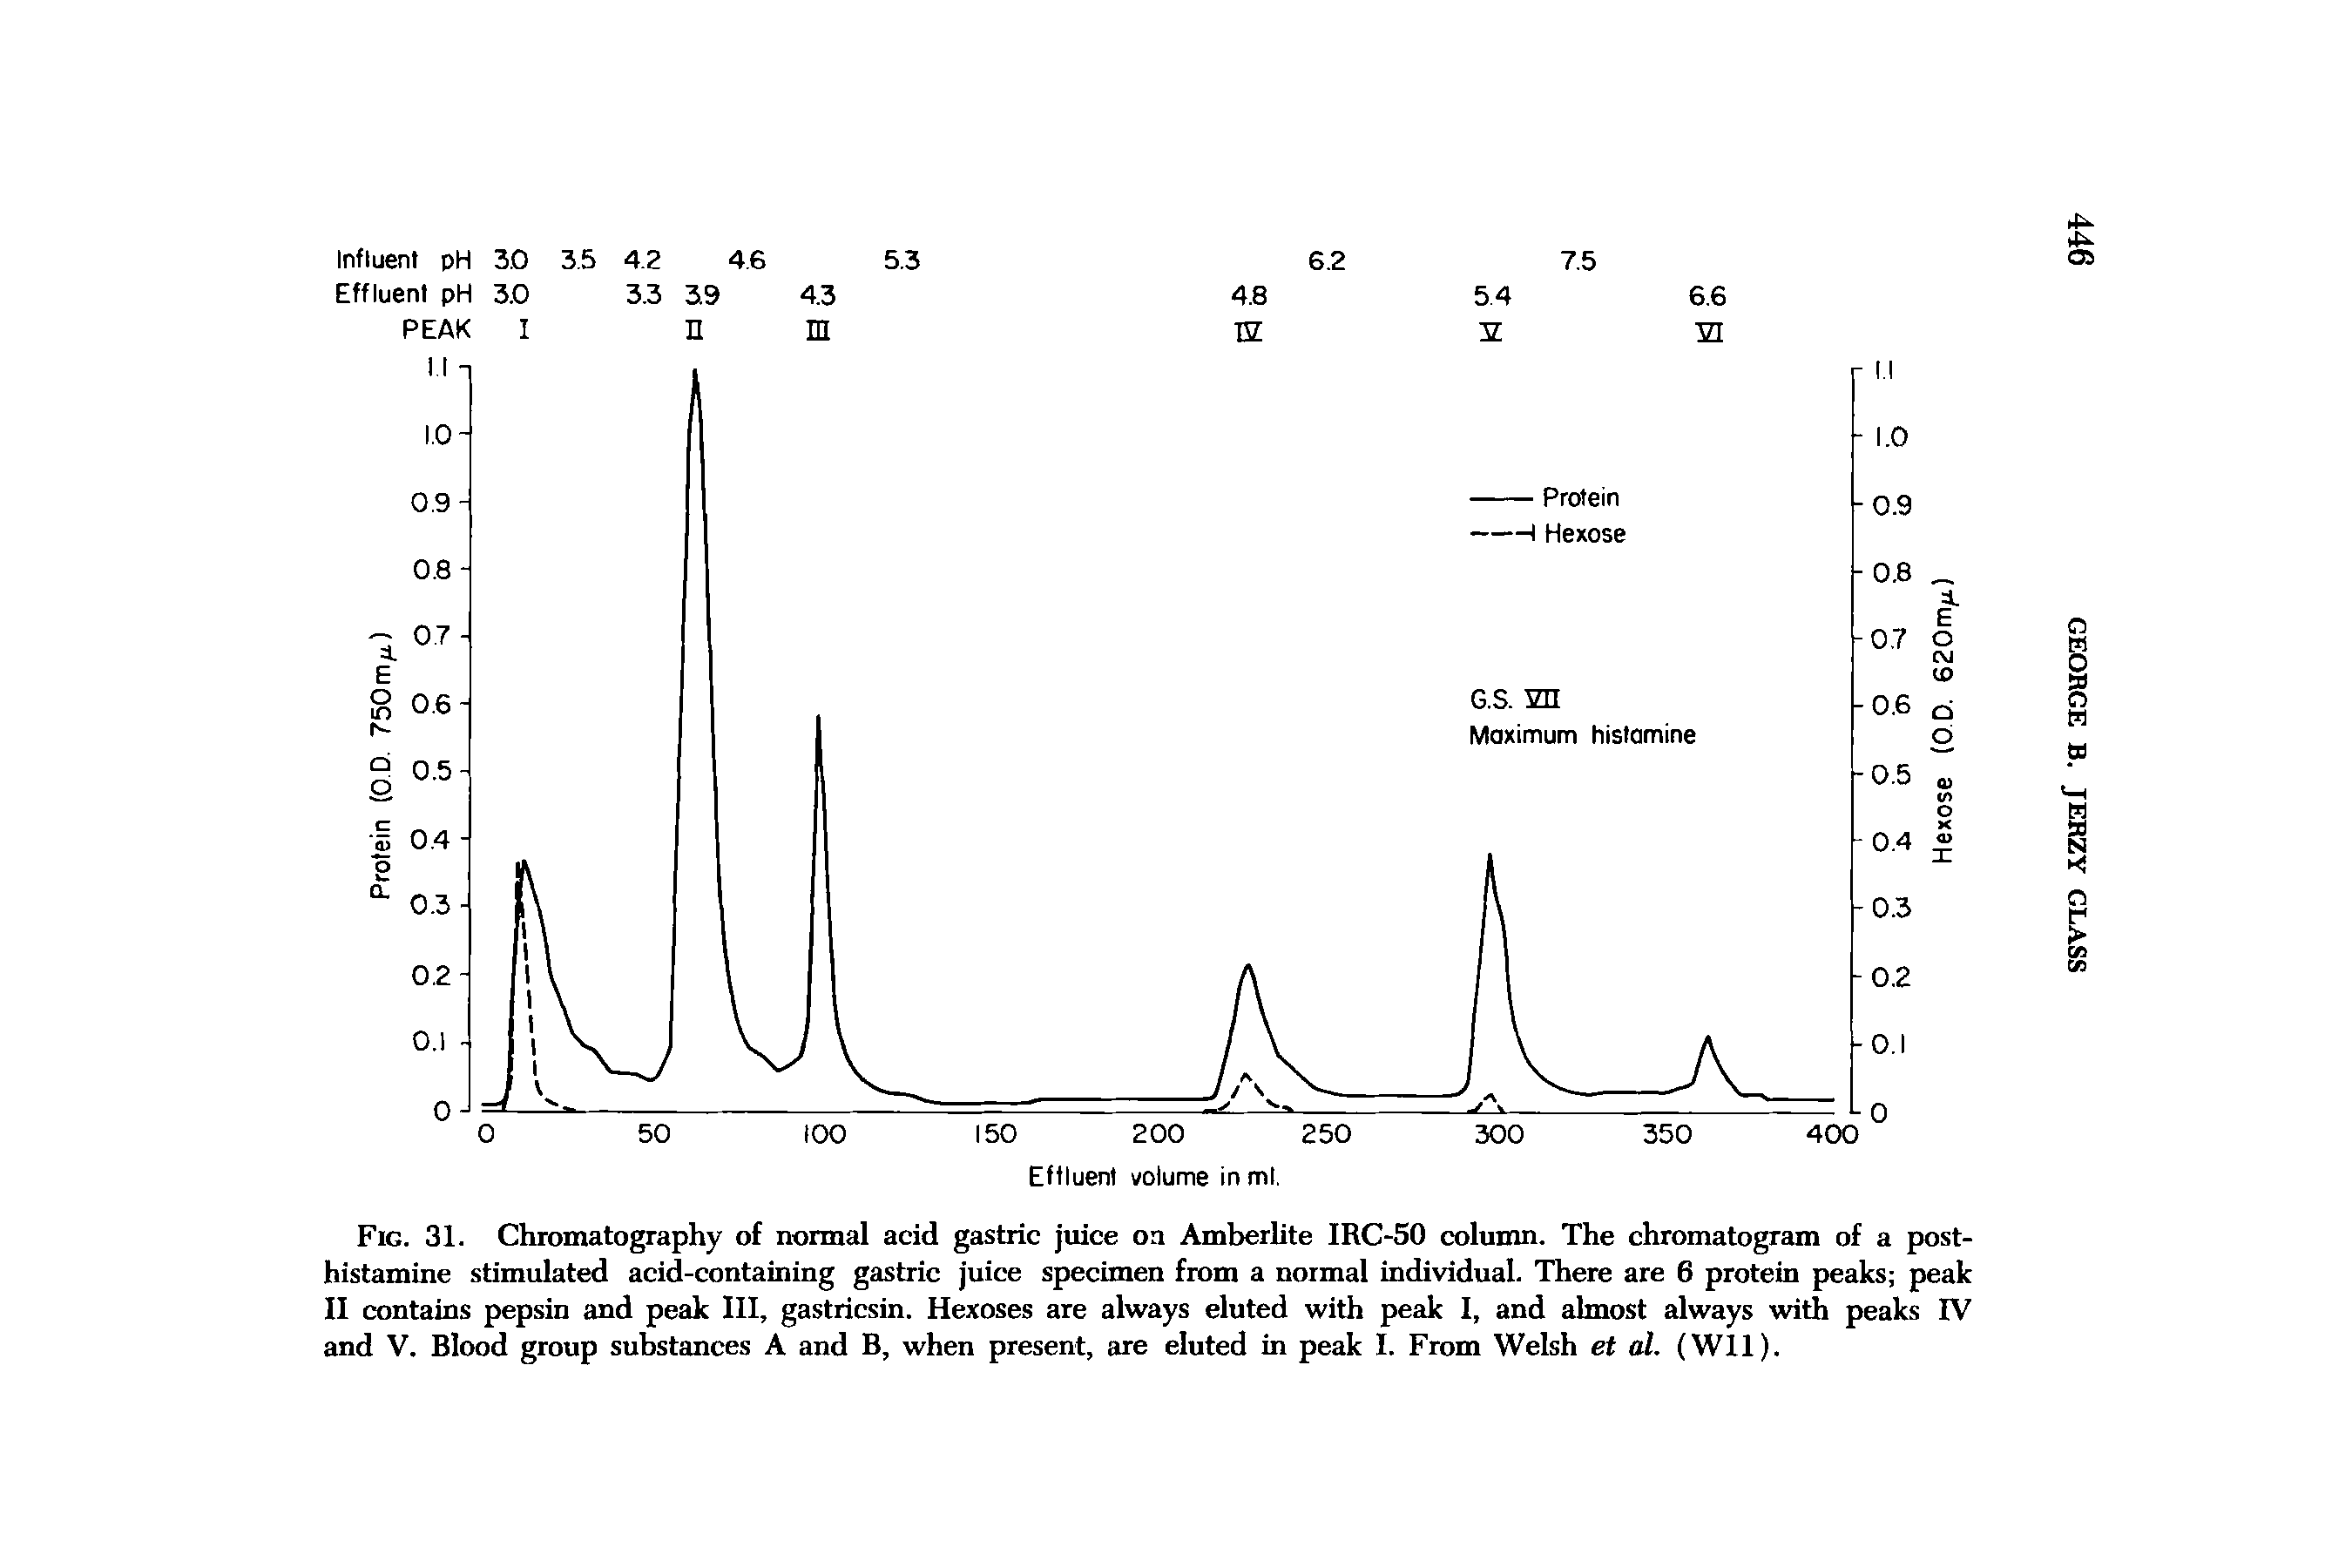 Fig. 31. Chromatography of normal acid gastric juice oa Amberhte IRC-50 column. The chromatogram of a posthistamine stimulated acid-containing gastric juice specimen from a normal individual. There are 6 protein peaks peak II contains pepsin and peak III, gastricsin. Hexoses are always eluted with peak I, and almost always with peaks IV and V. Blood group substances A and B, when present, are eluted in peak I. From Welsh et al. (Wll).